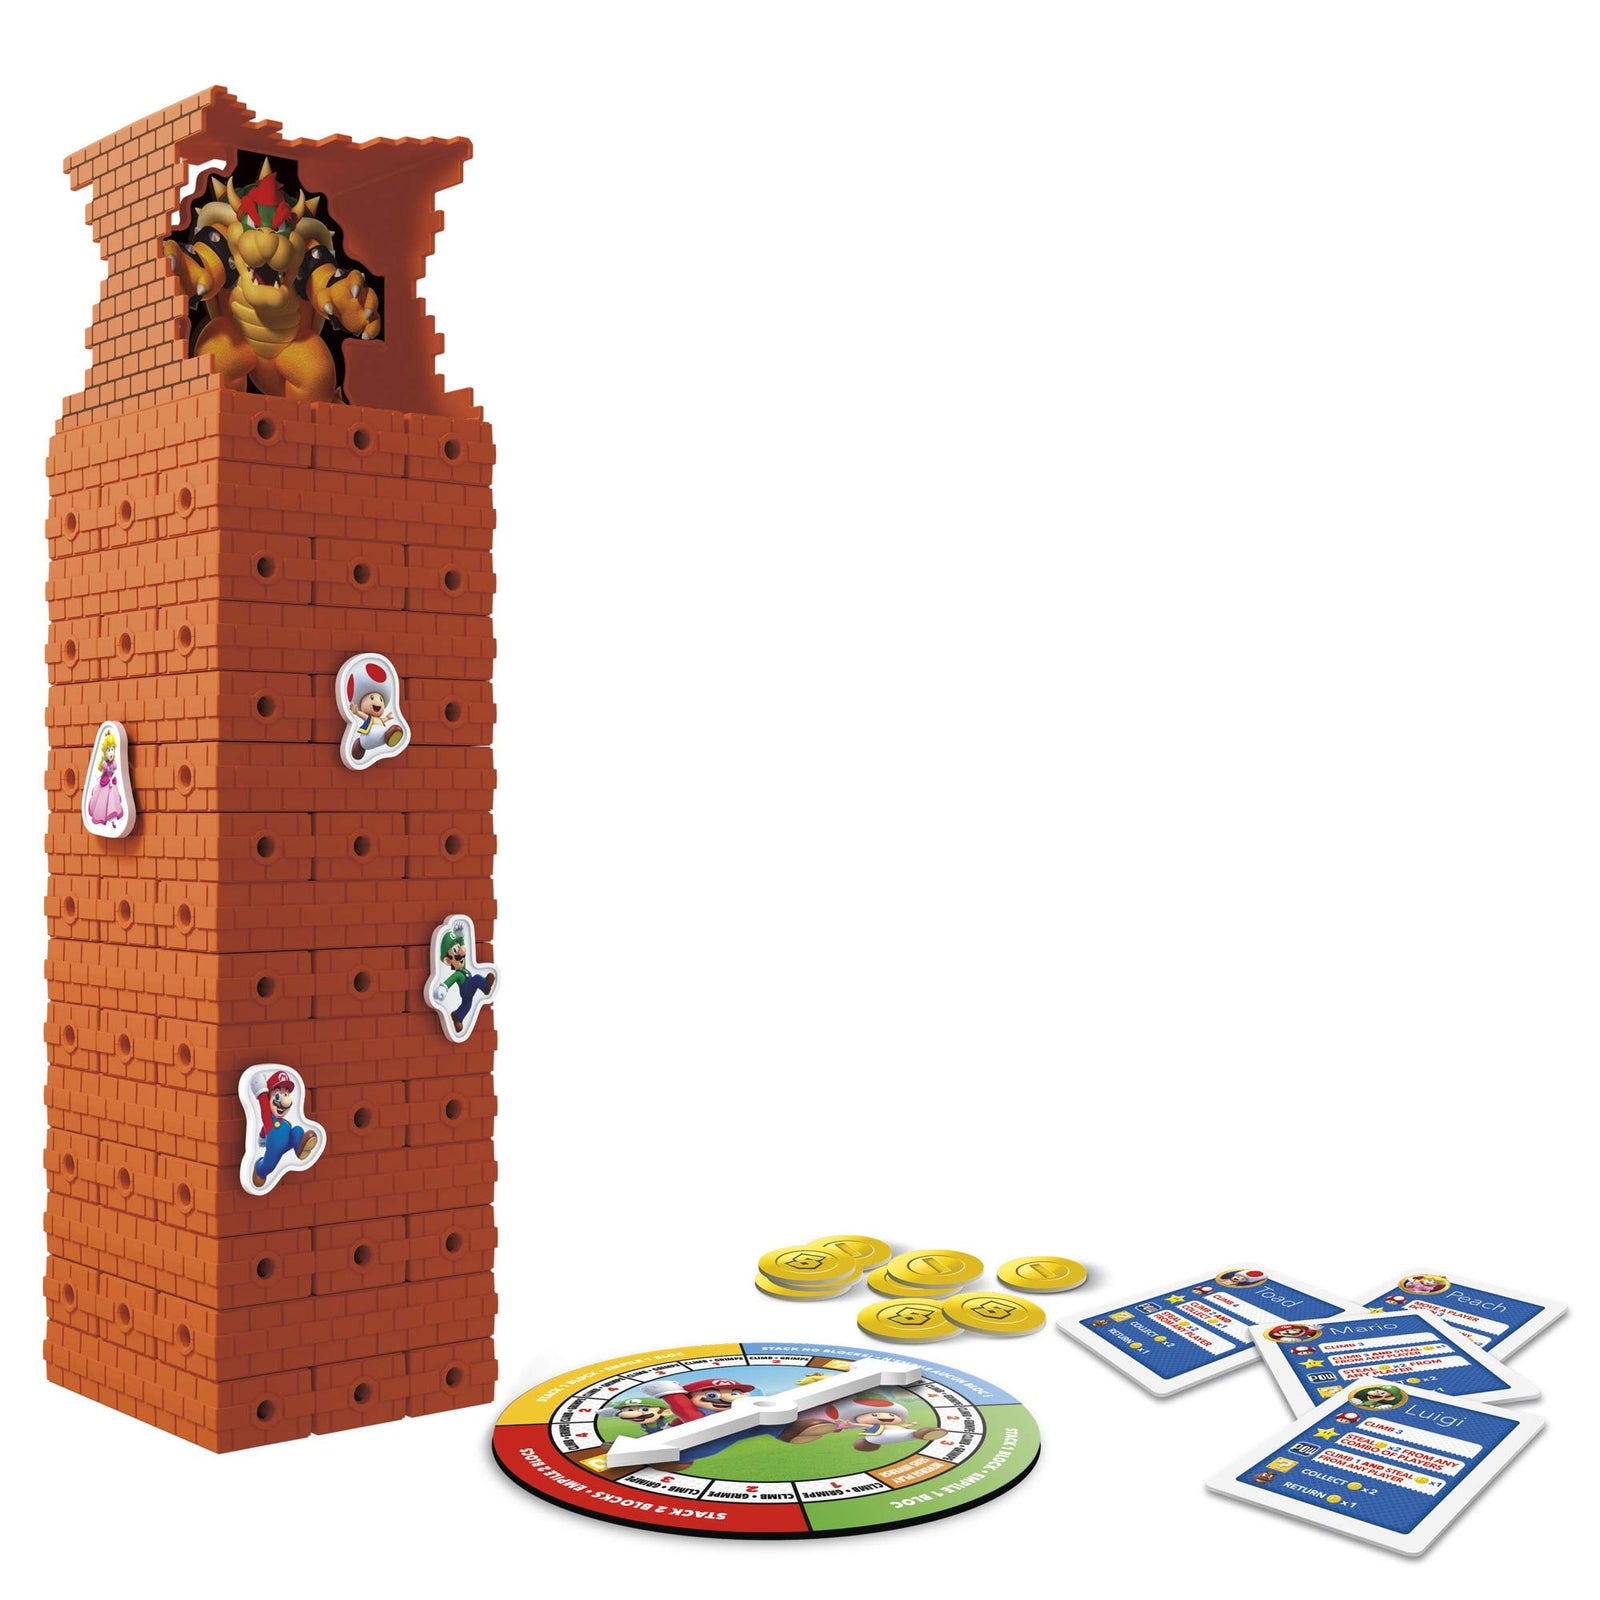 Hasbro Gaming Jenga: Super Mario Edition Game, Block Stacking Tower Game for Super Mario Fans, Ages 8 and Up